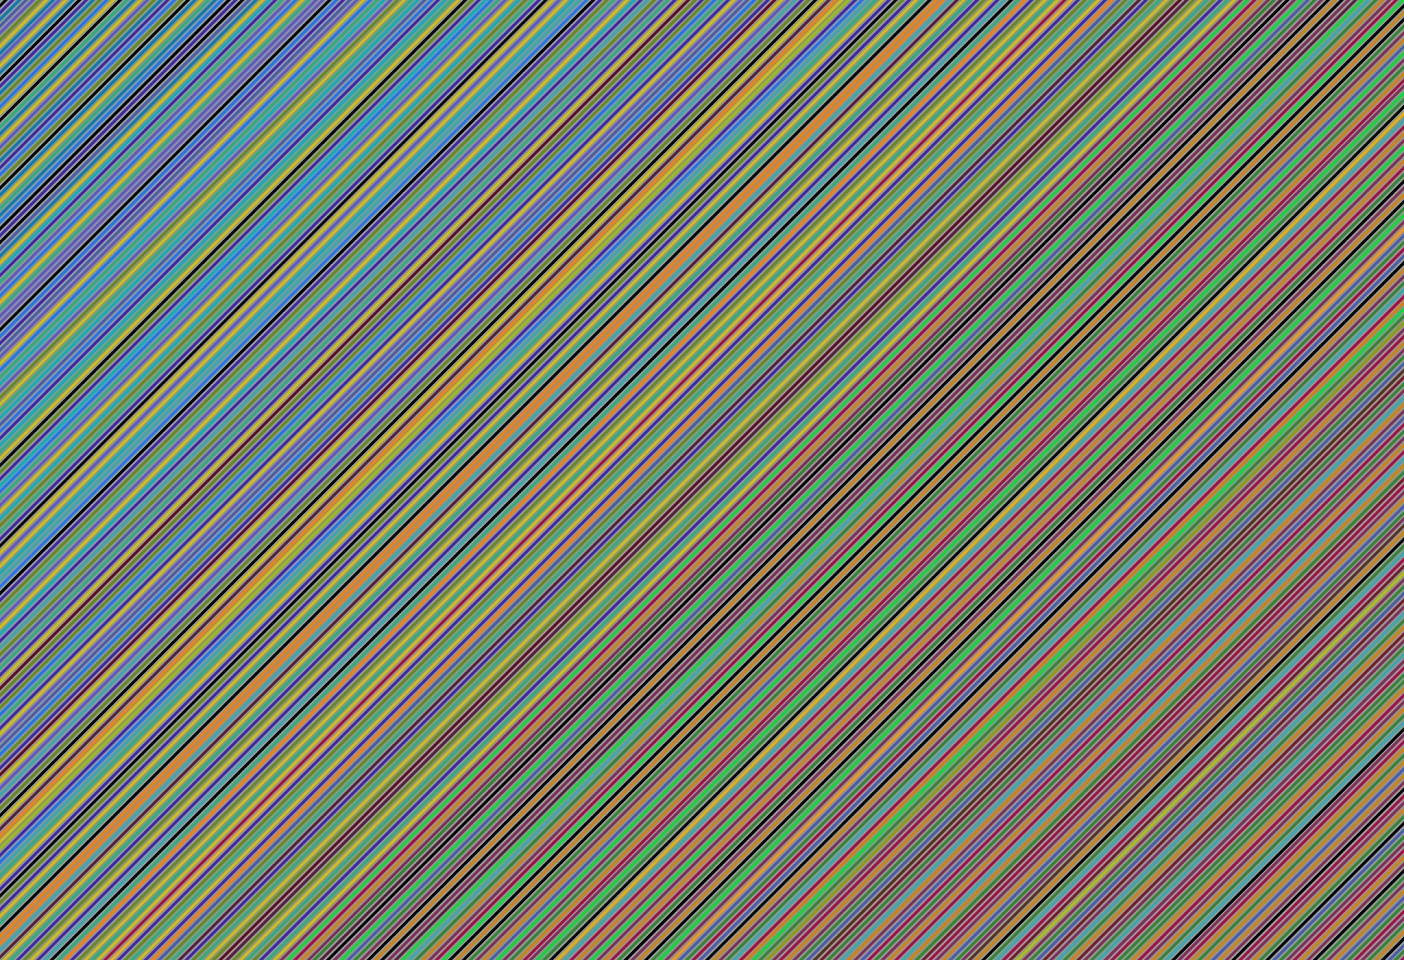 Dane Albert, Color Sticks #22 Dusk, 2023
Acrylic on canvas (Concept), 48 x 72 in. (121.9 x 182.9 cm)
Series of colored lines and shapes in multiple configurations
DA.2023.sticks-022-dusk